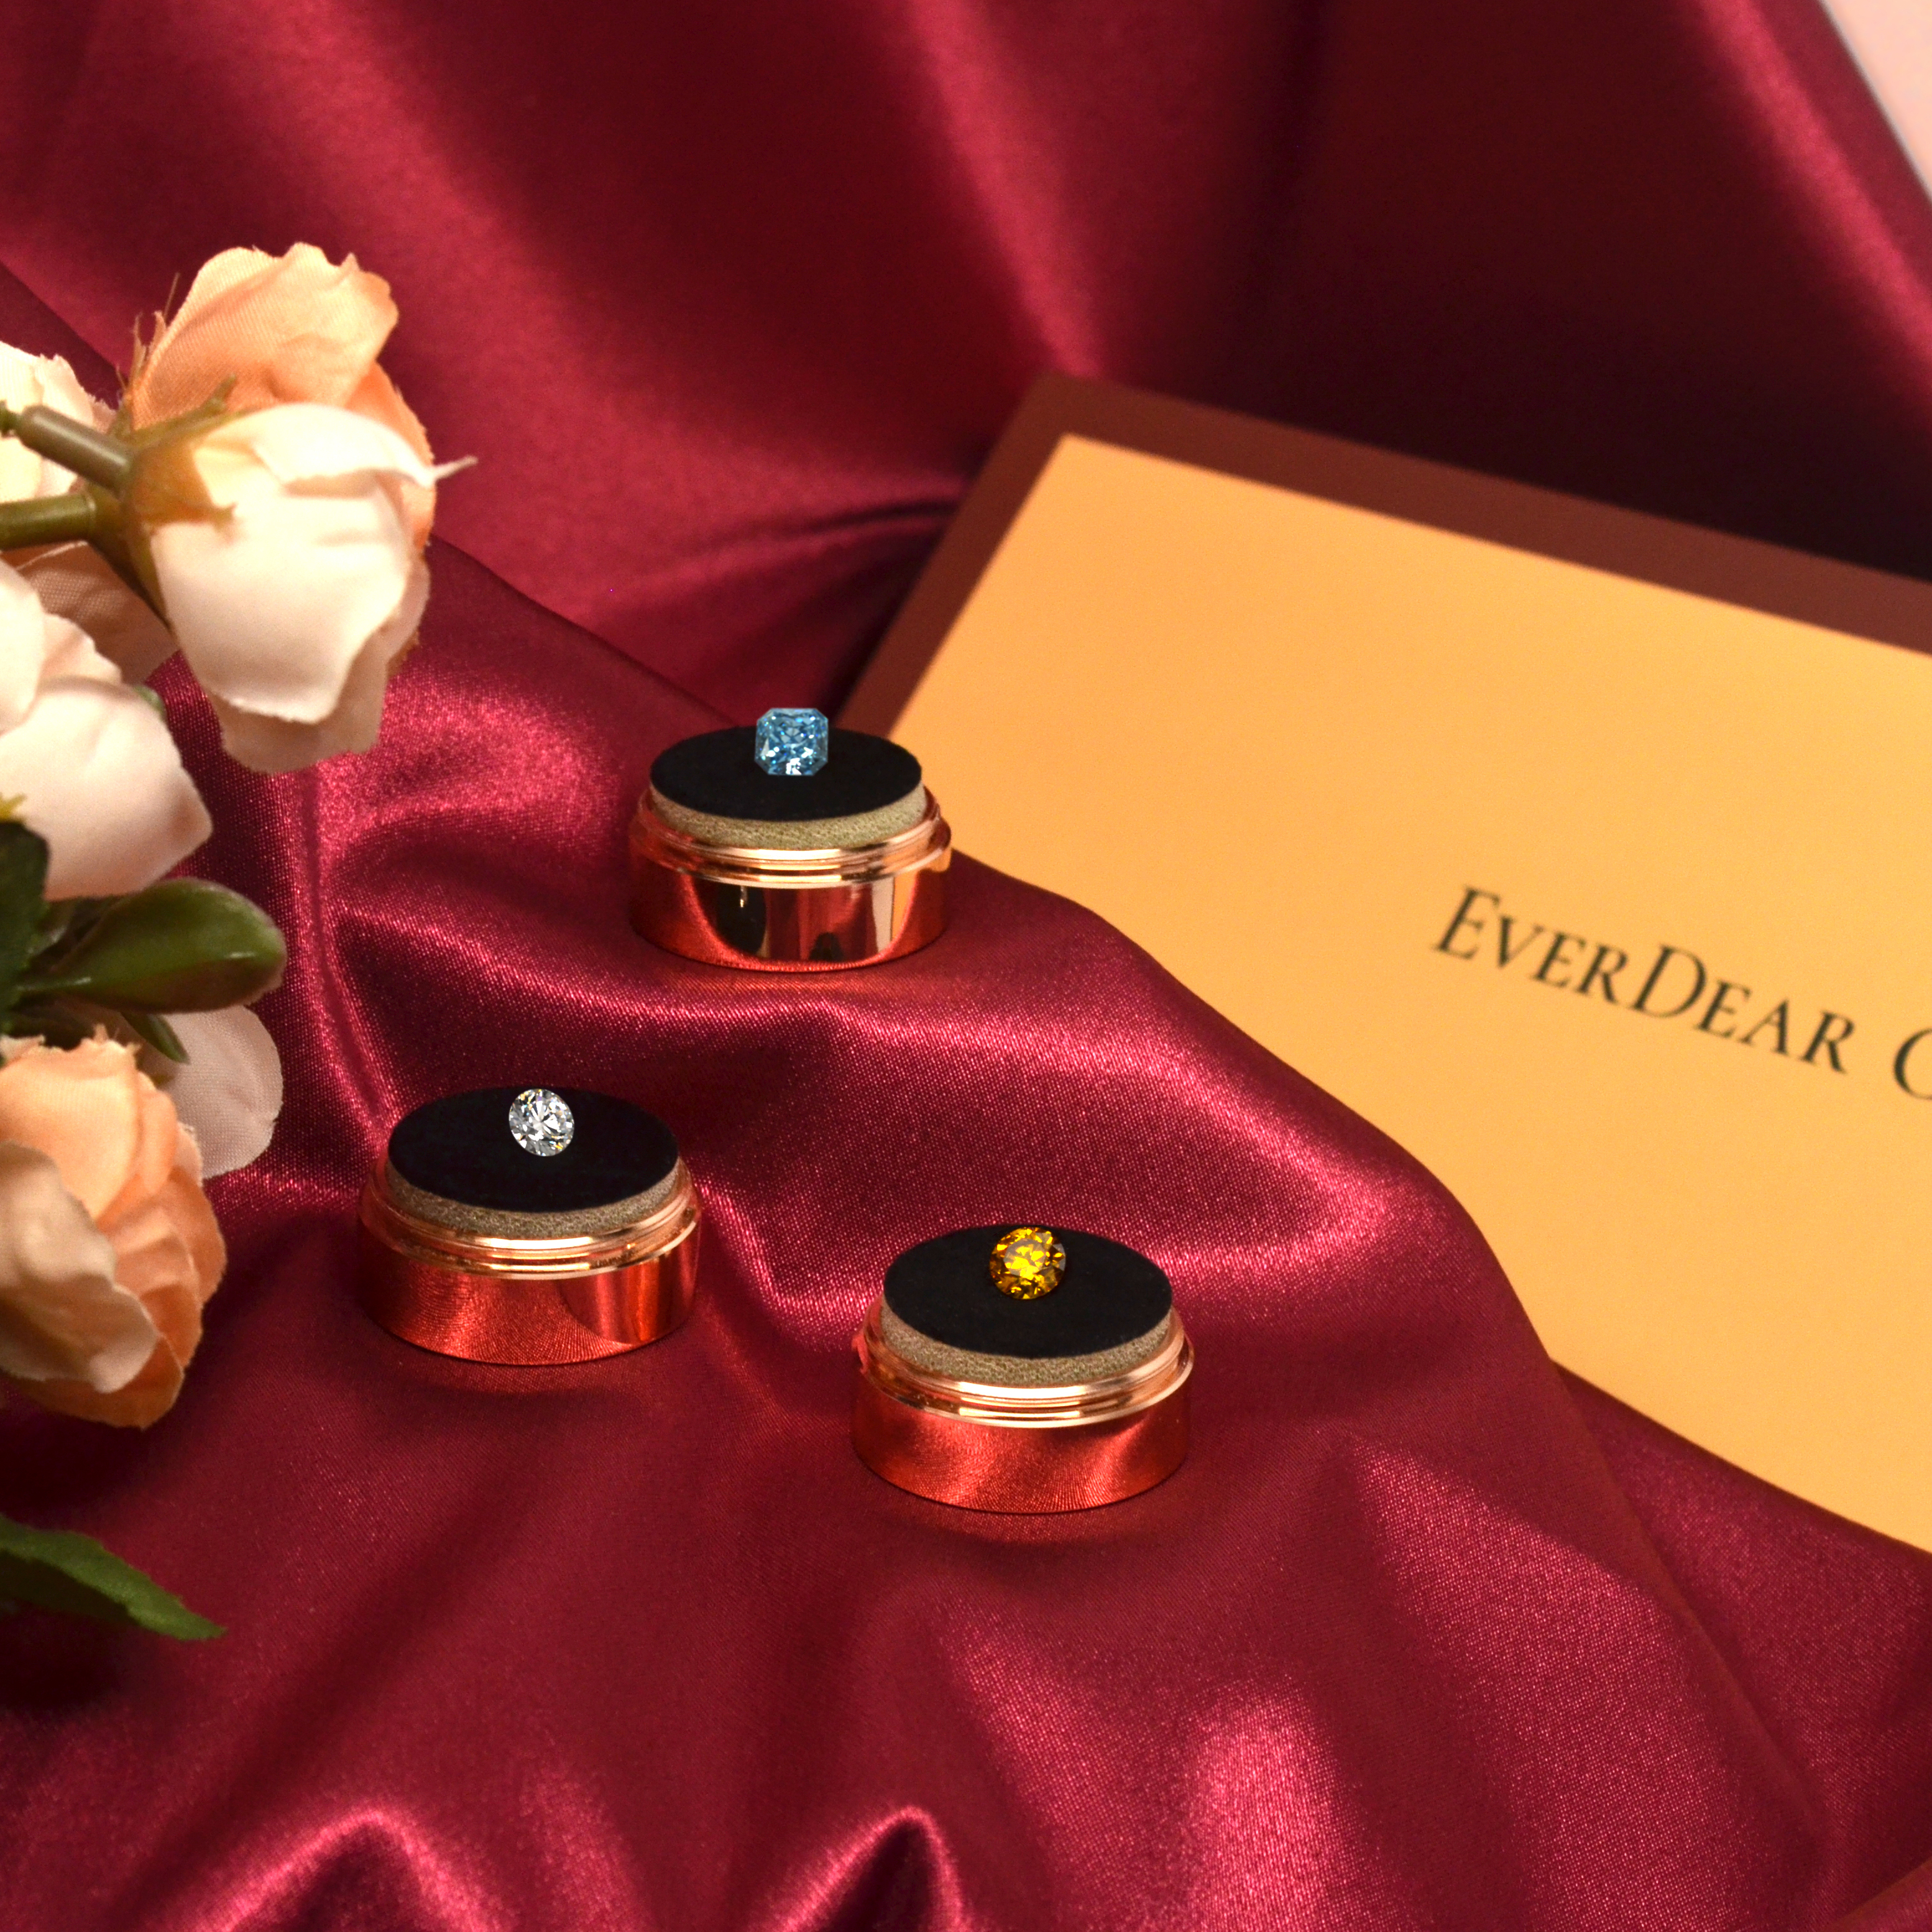 EverDear™ | Pet Ashes to Cremation Diamonds | EverDear™ | Cremation Diamonds  from Ashes and Hair - from $ 895!